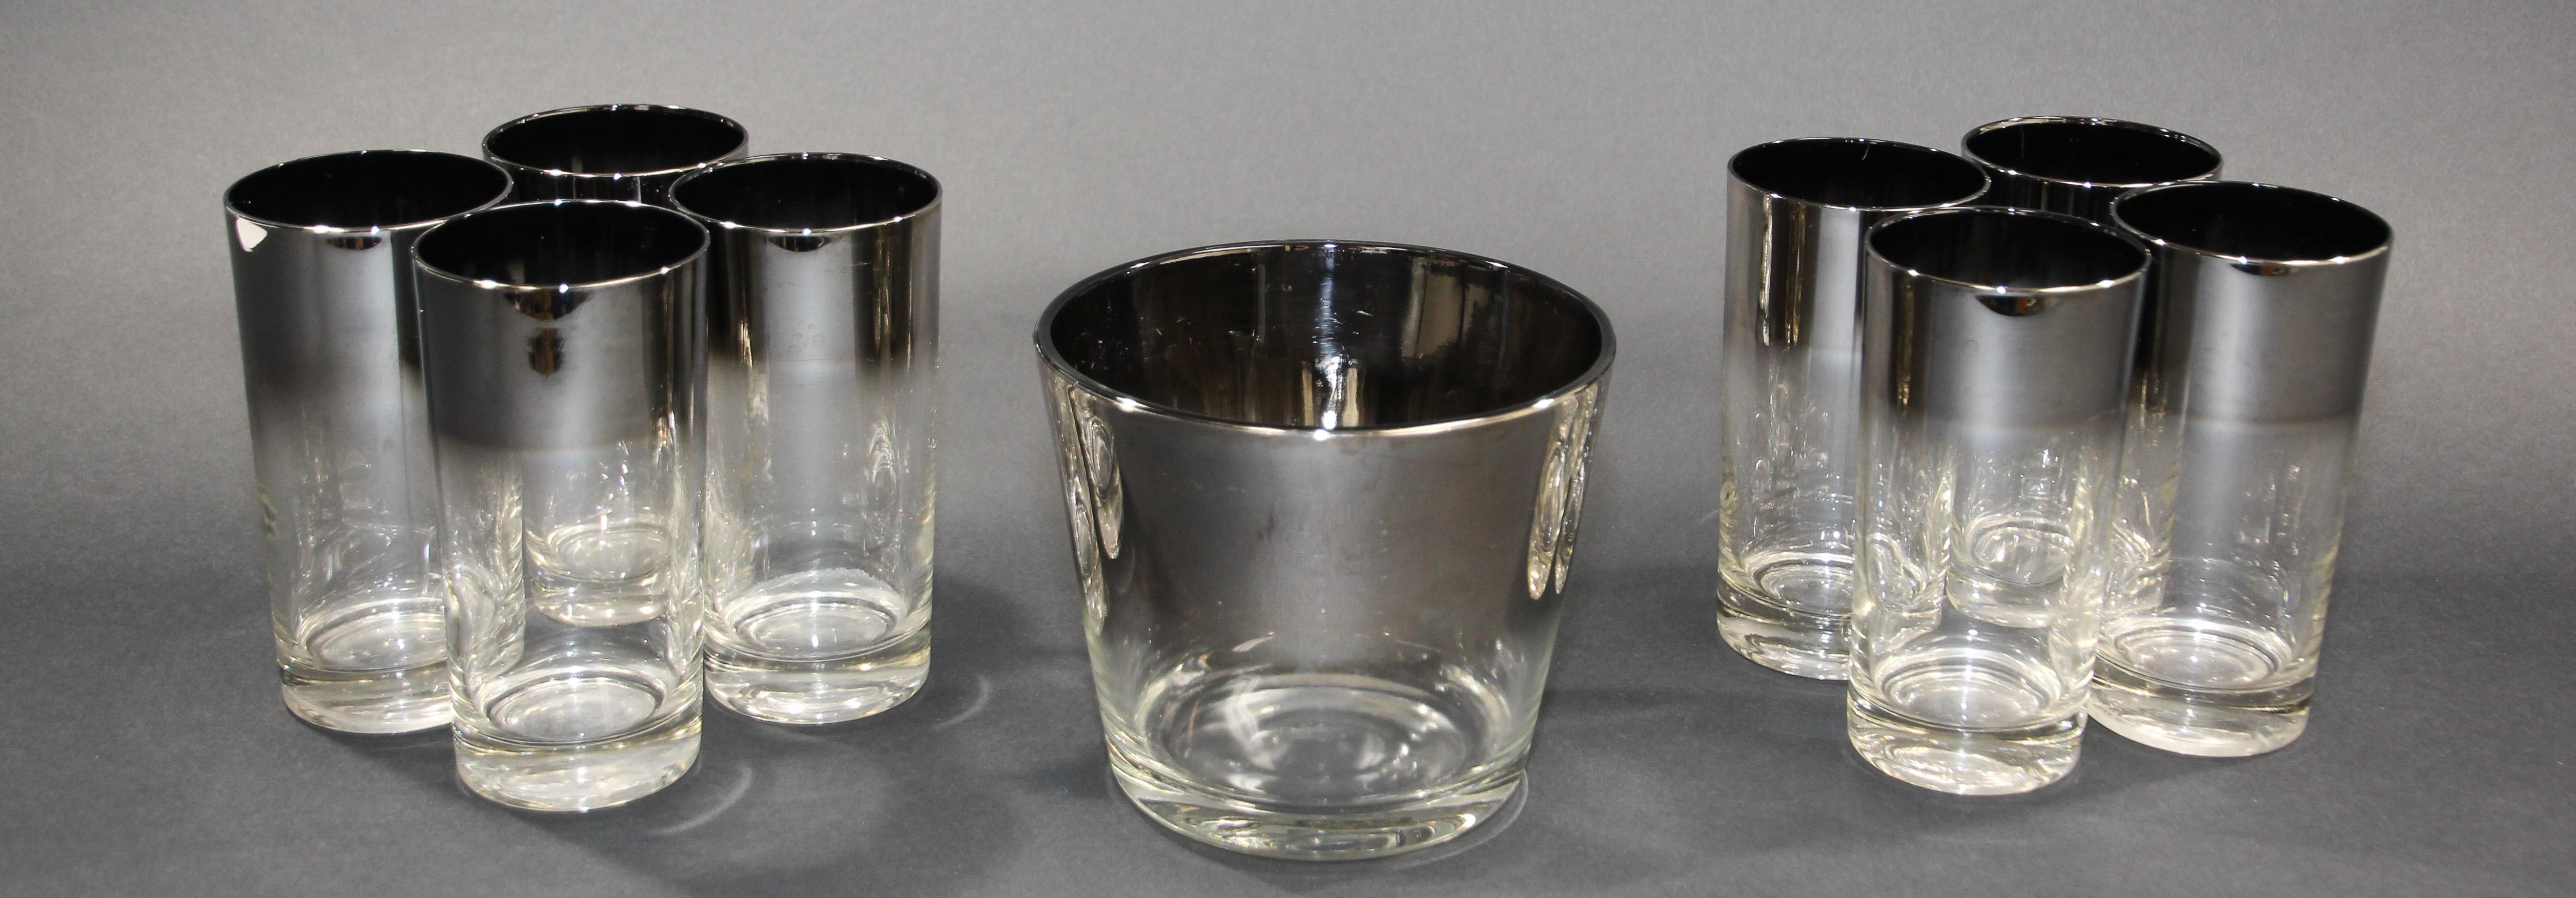 Dorothy Thorpe Mid-Century Silver Fade Cocktail Barware Glasses and Ice Bucket For Sale 3